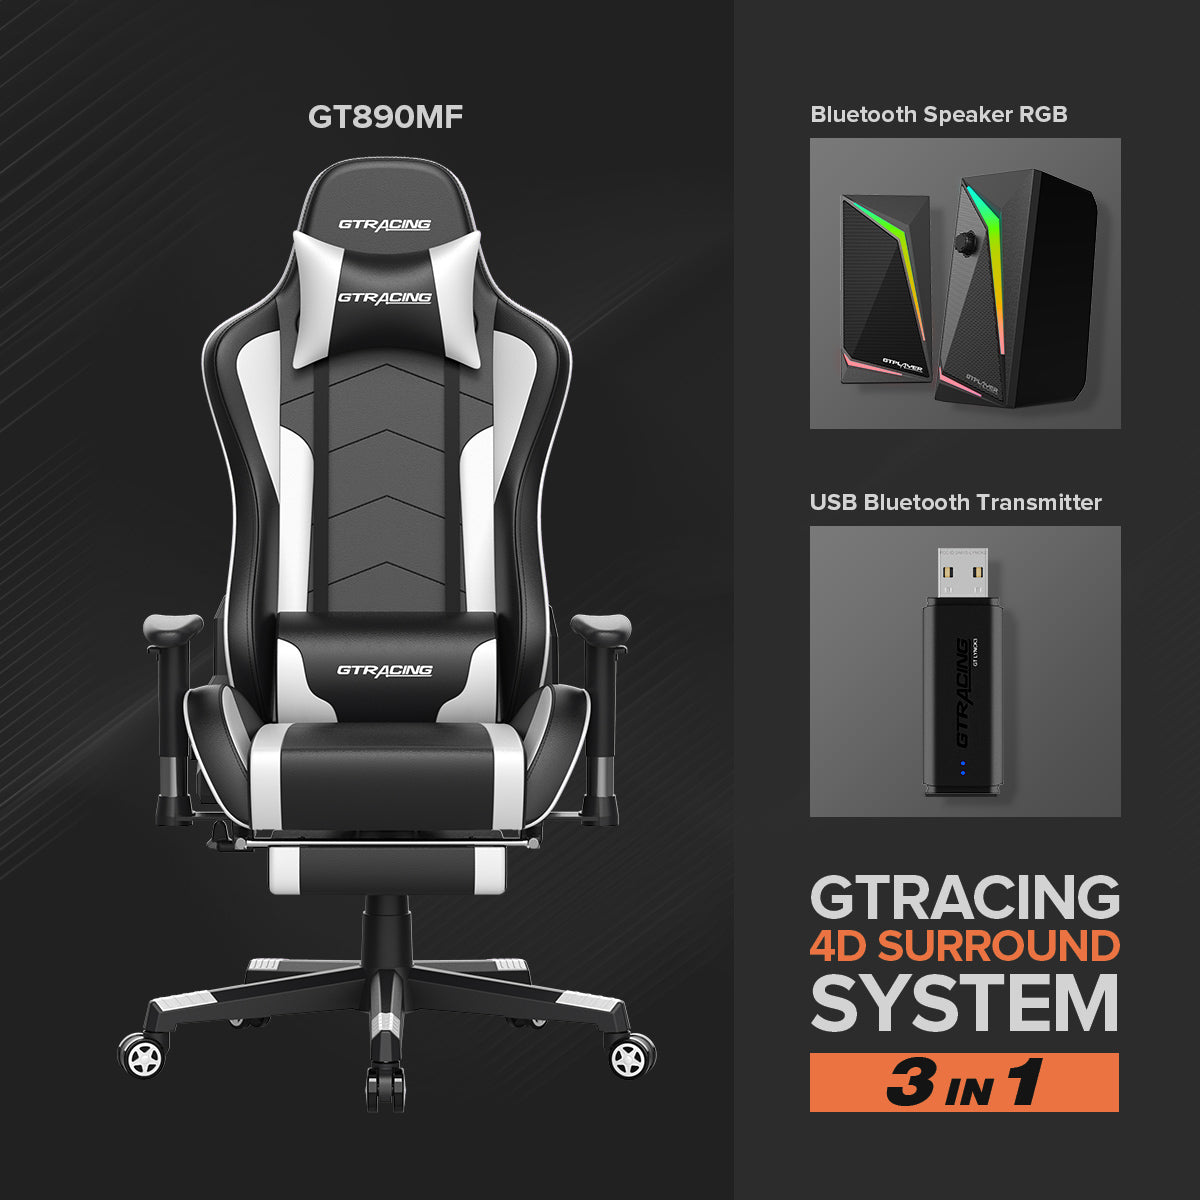 GTRACING  LYNCK 4D Surround System (GT890MF, Bluetooth Speaker, and USB transmitter 3 in 1)